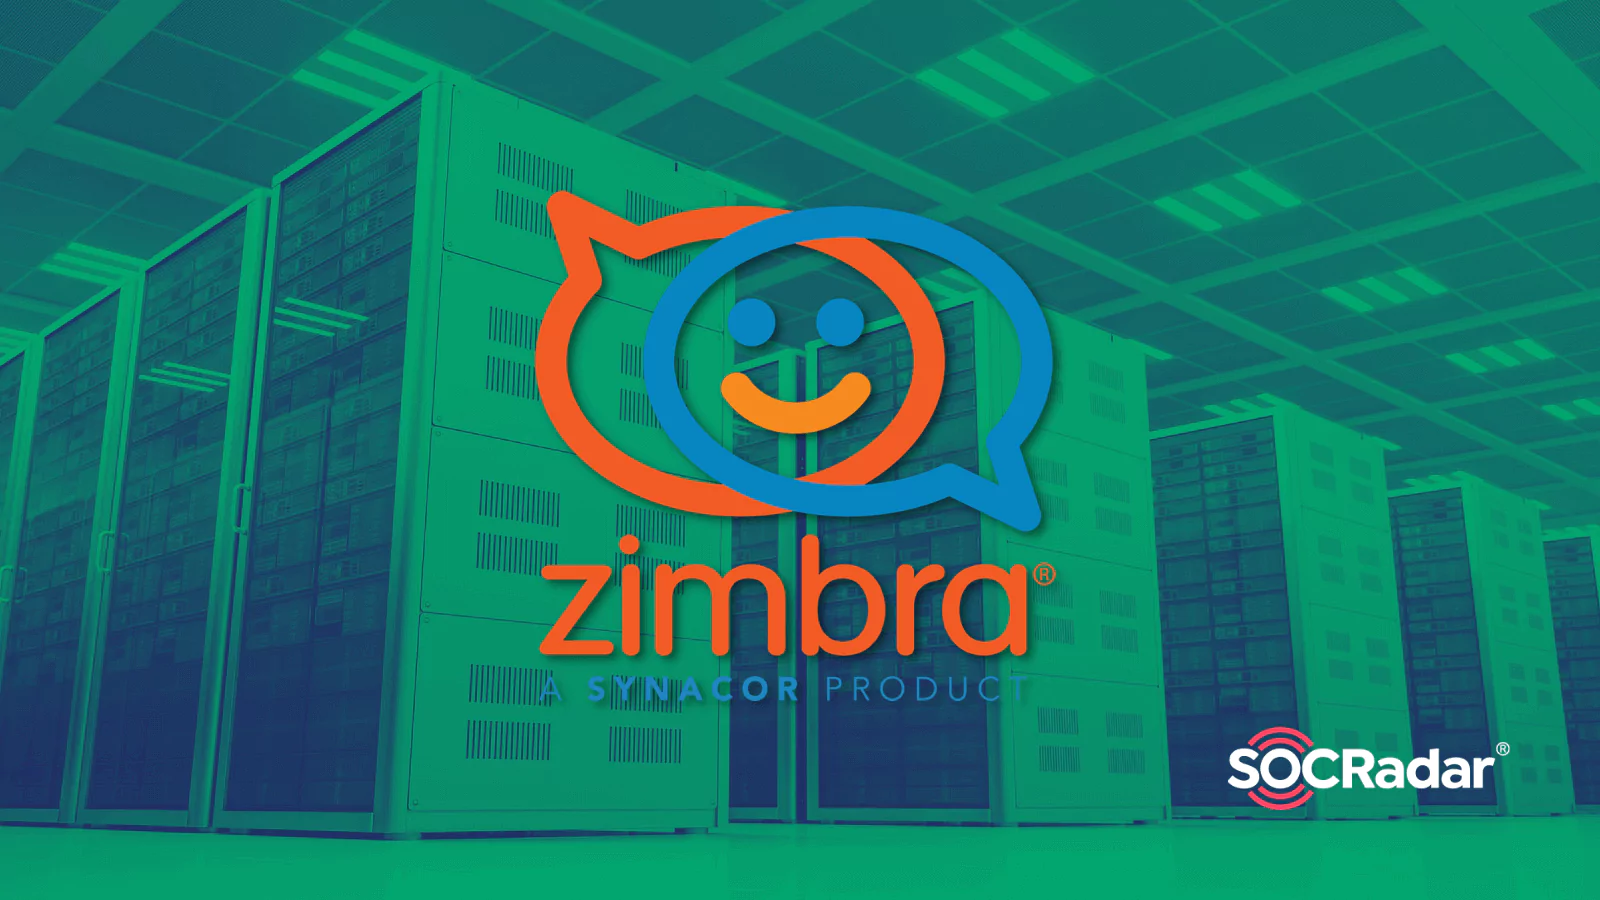 Researchers Flag Zimbra Vulnerability, Company Issues Patch